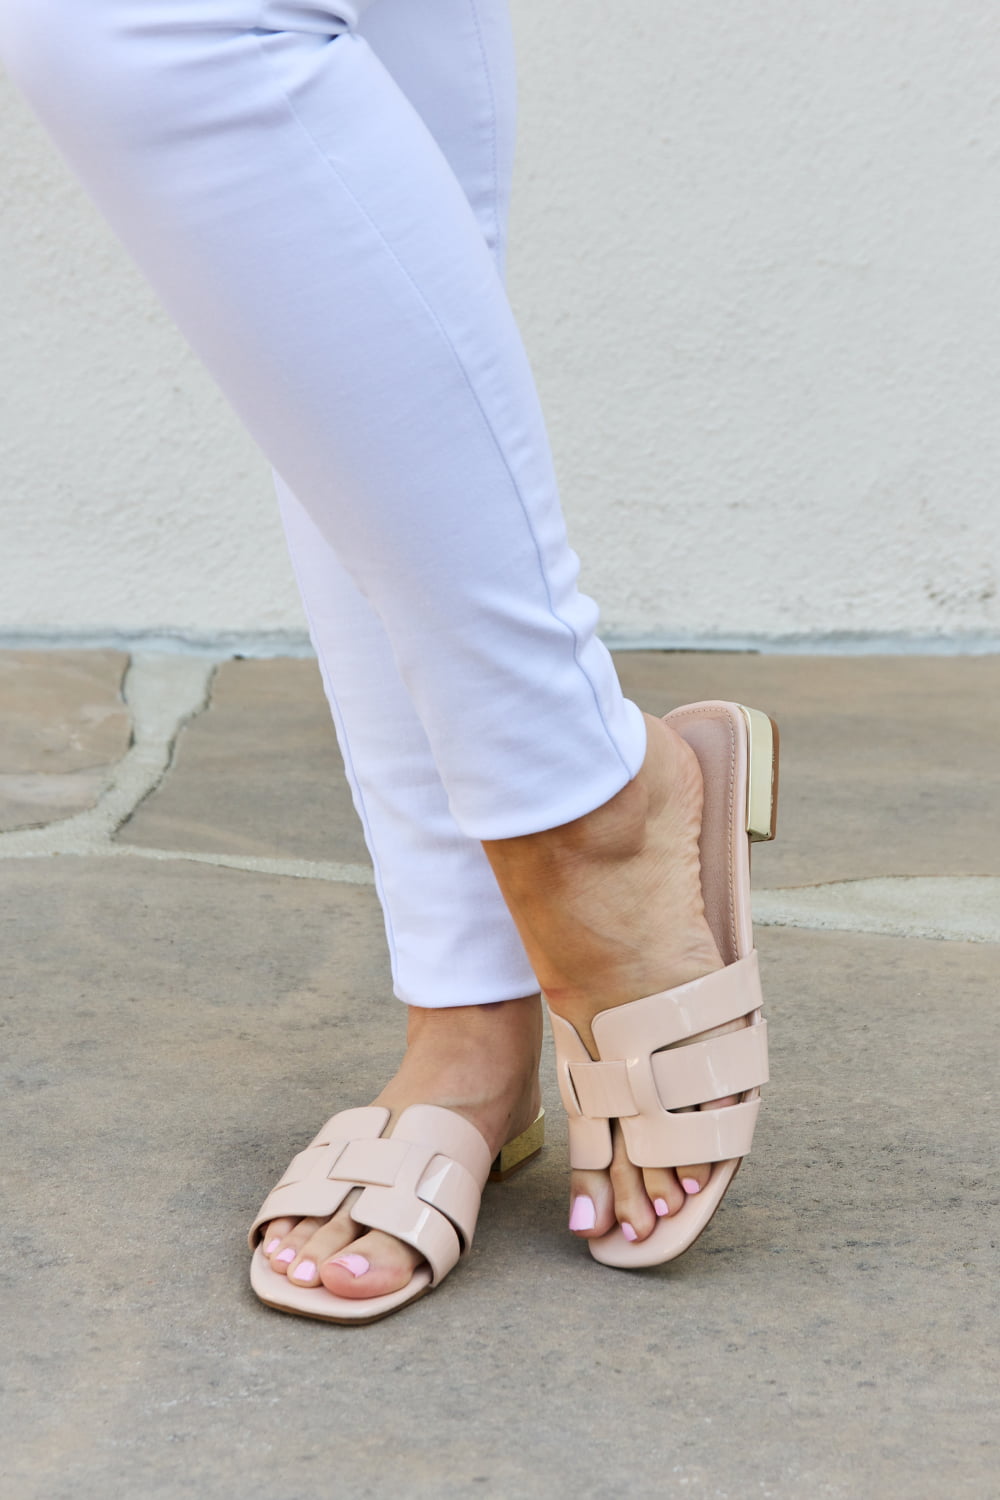 Weeboo Walk It Out Slide Sandals in Cream - Cheeky Chic Boutique